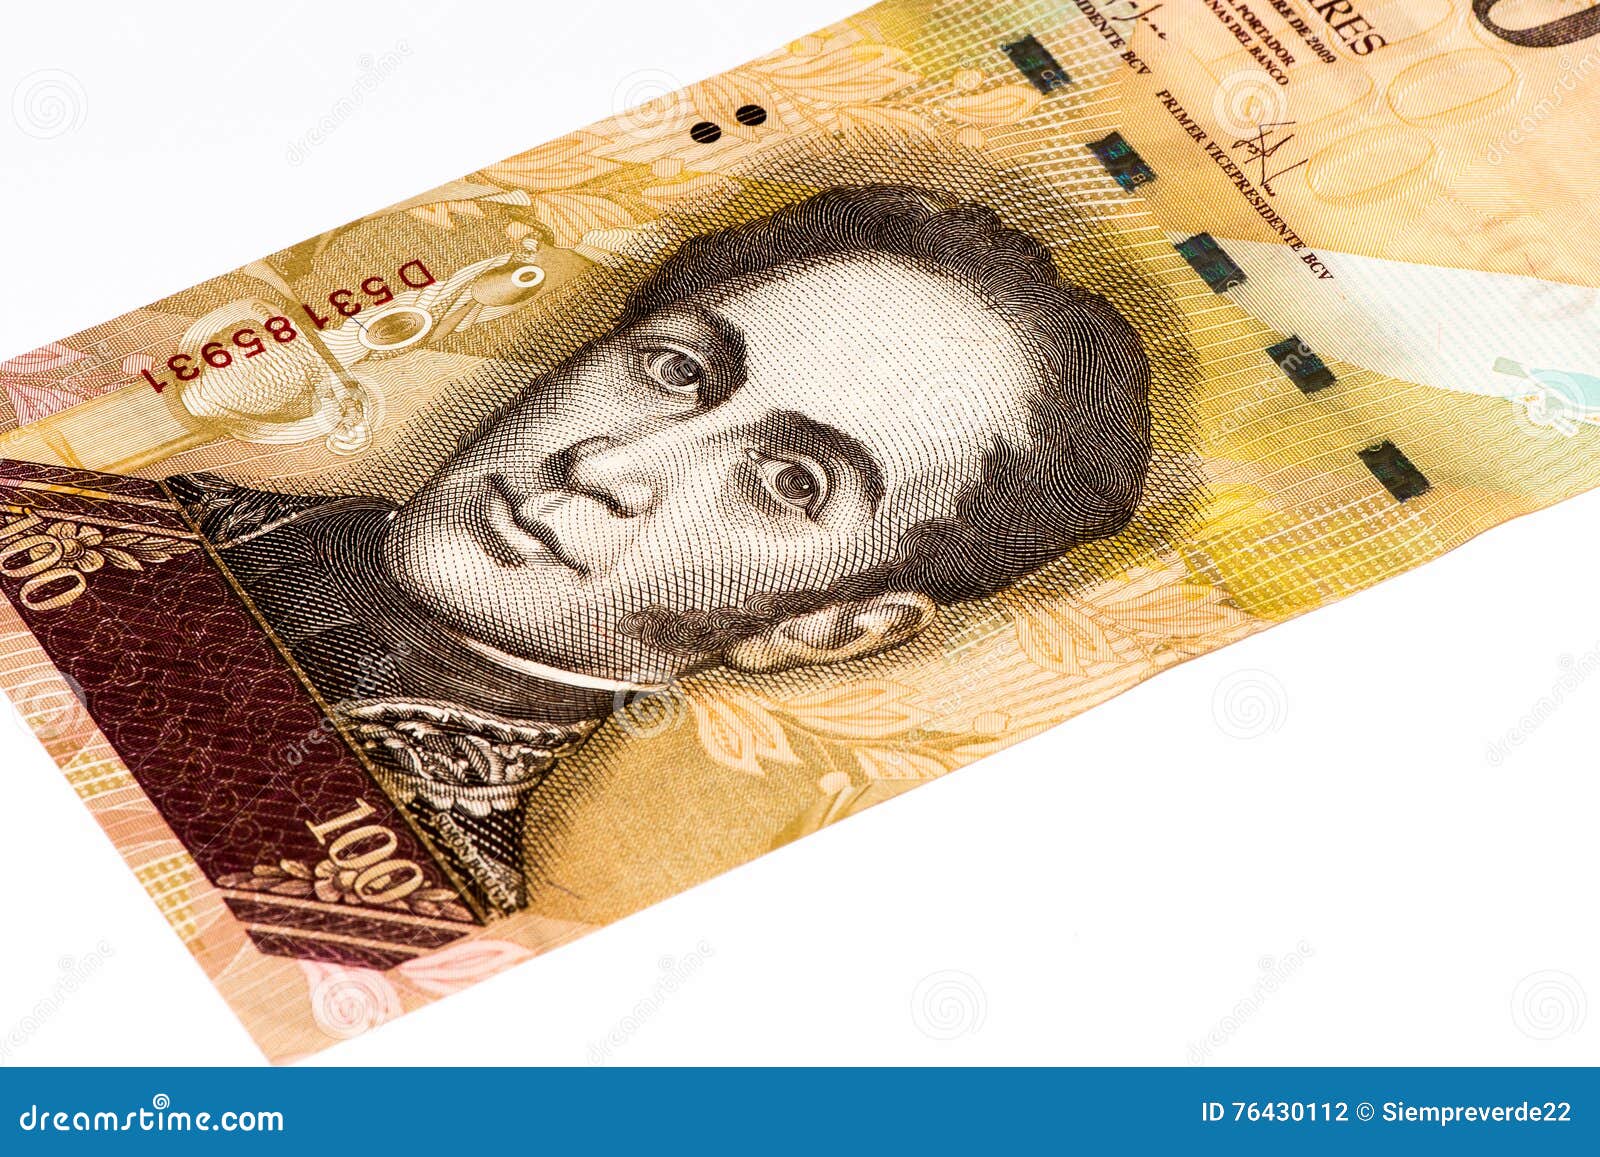 south america currancy banknote